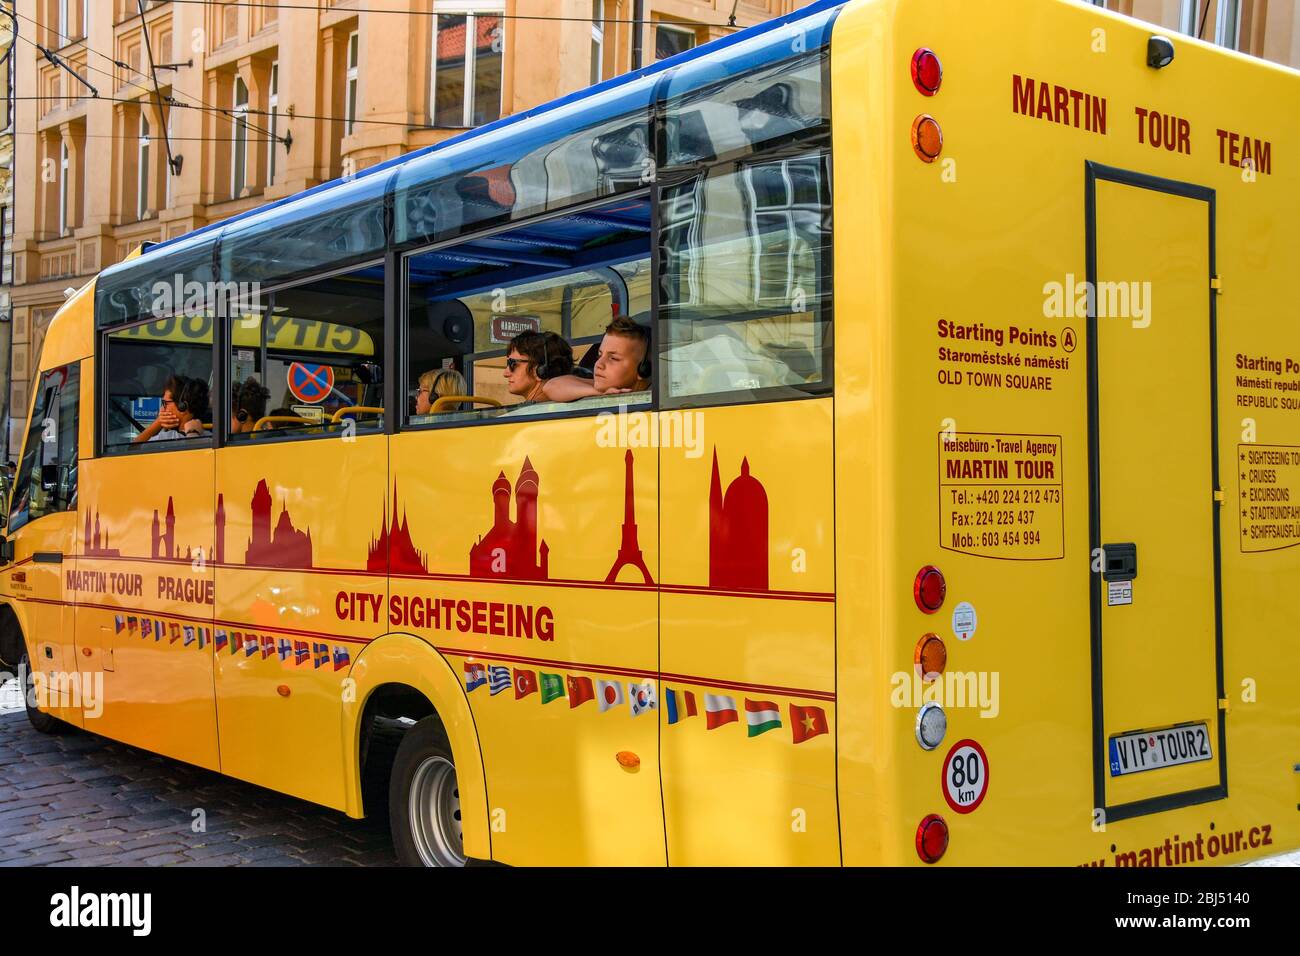 PRAGUE, CZECH REPUBLIC - JULY 2018: City sightseeing tour bus with people on board in the centre of Prague Stock Photo